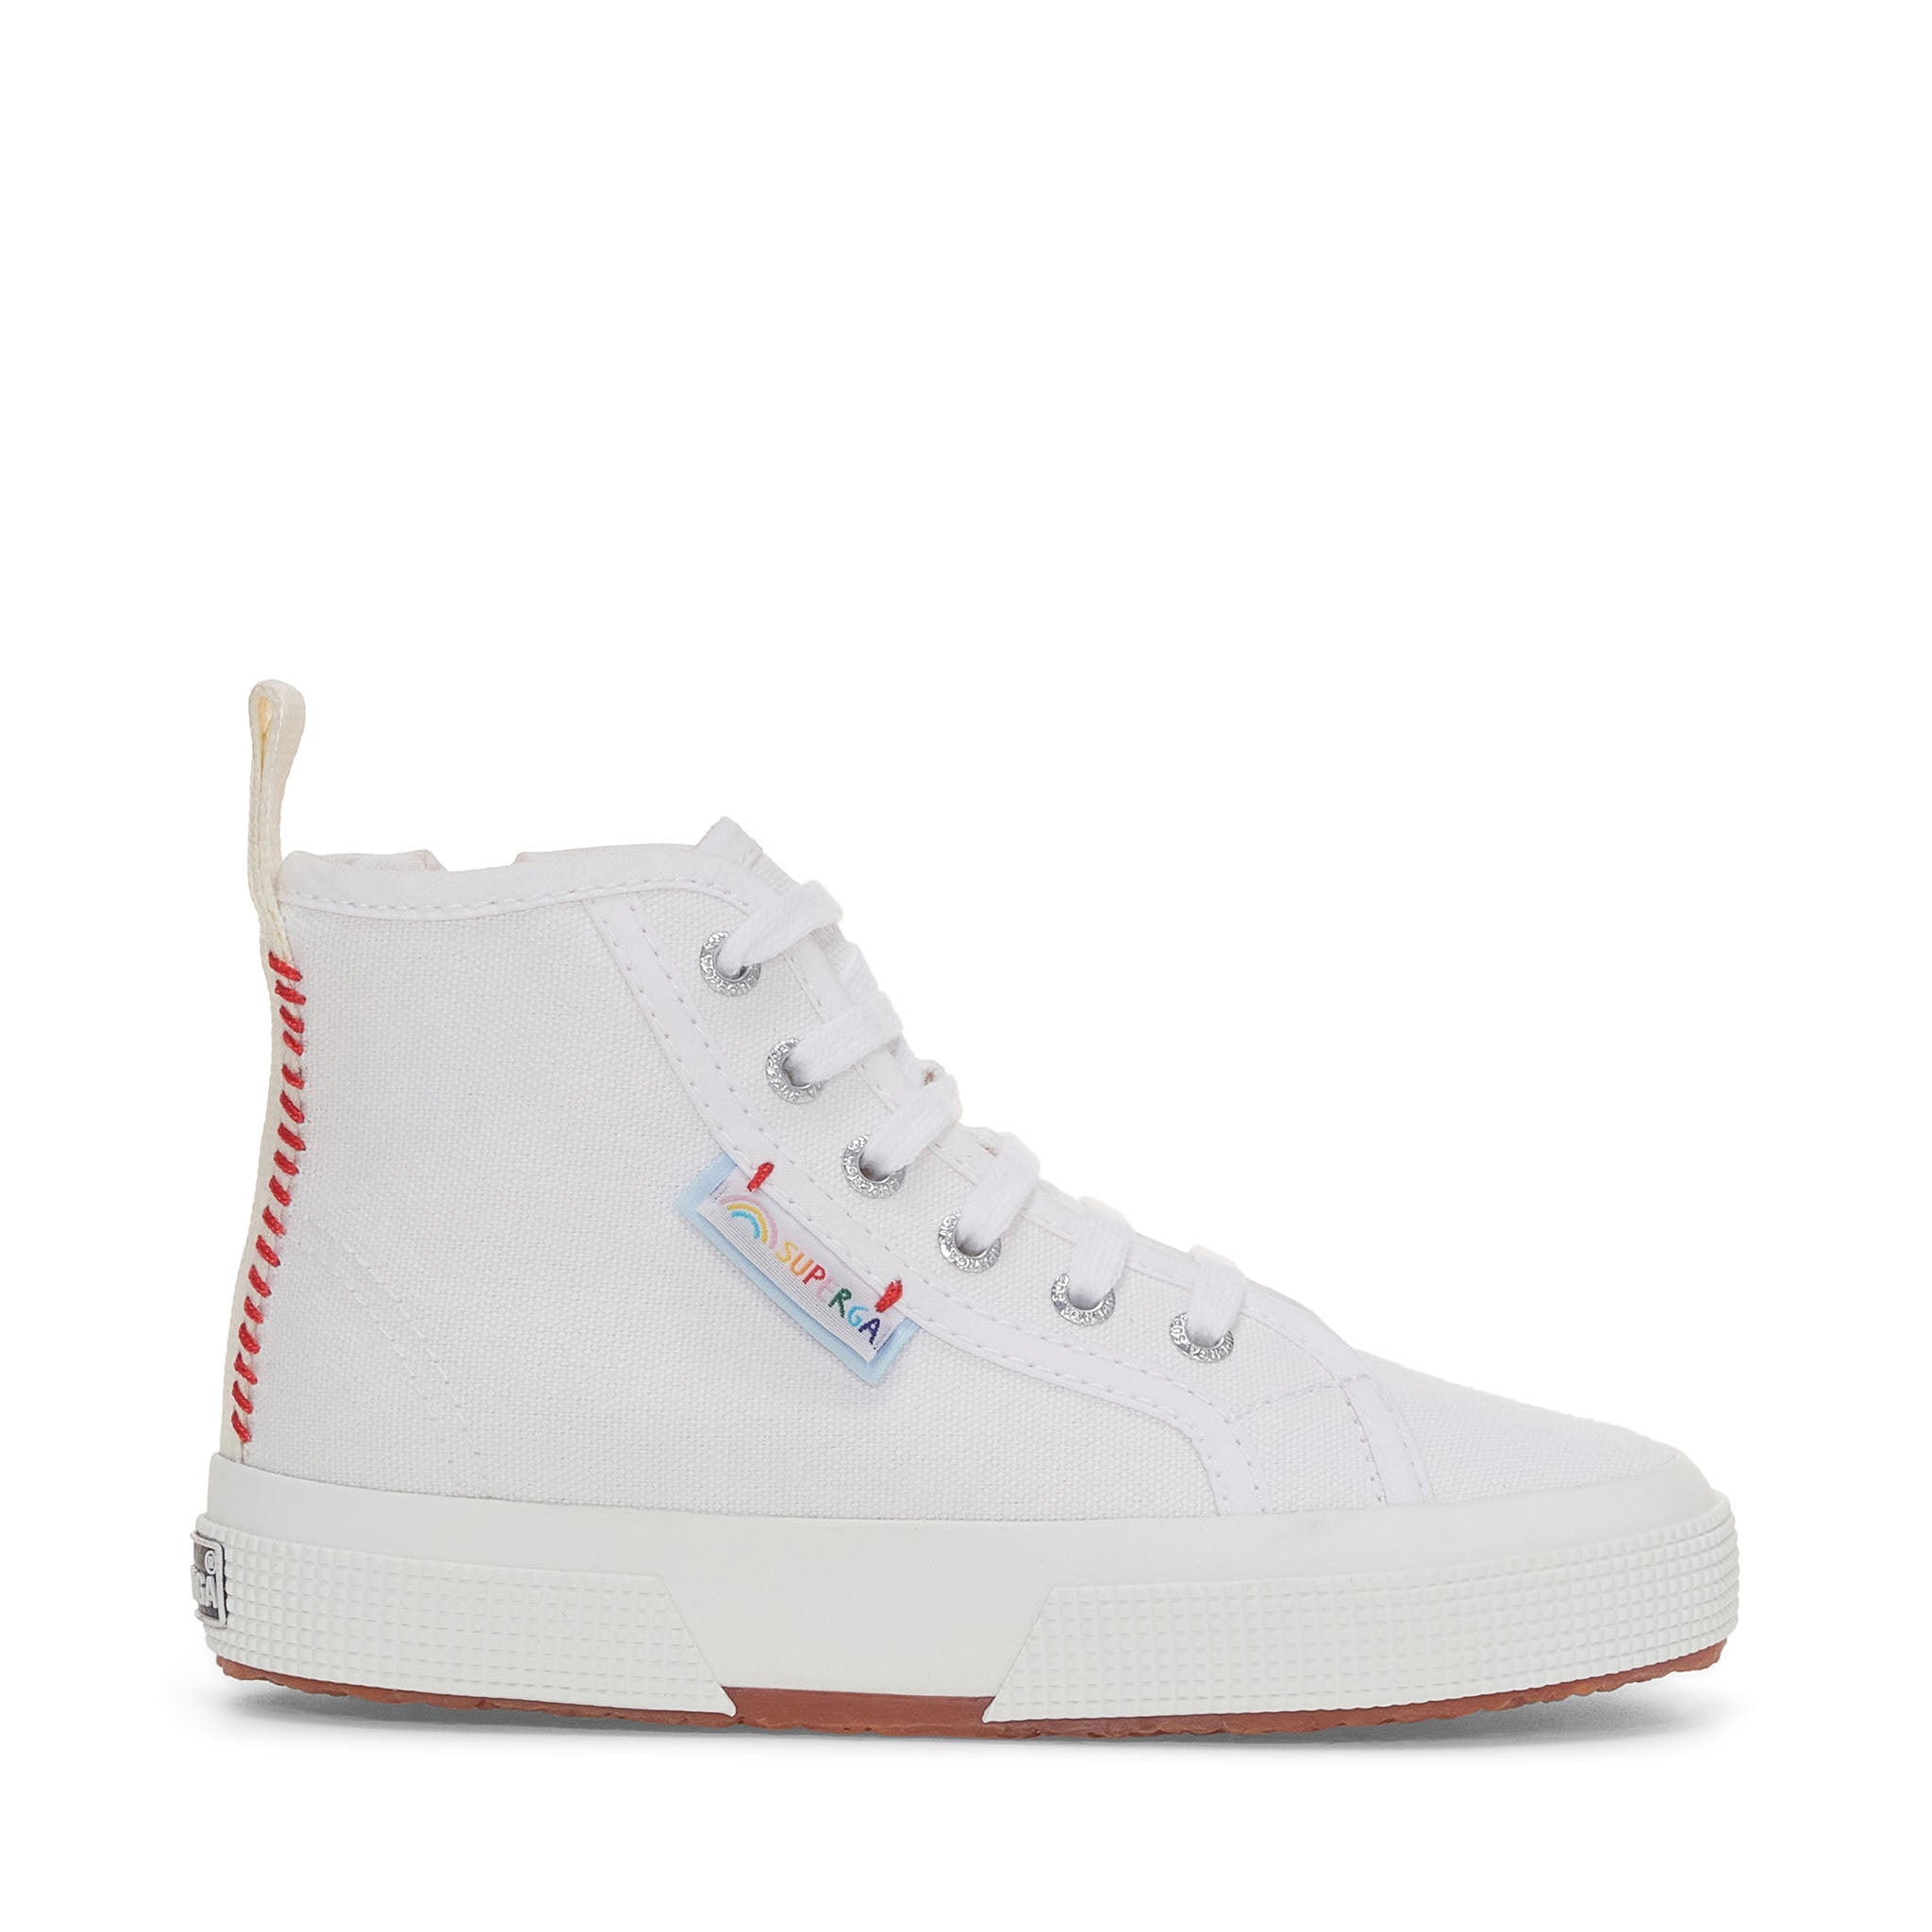 Superga 2709 Kids Funny Label Sneakers - White Multicolor Label Rainbow. Side view.